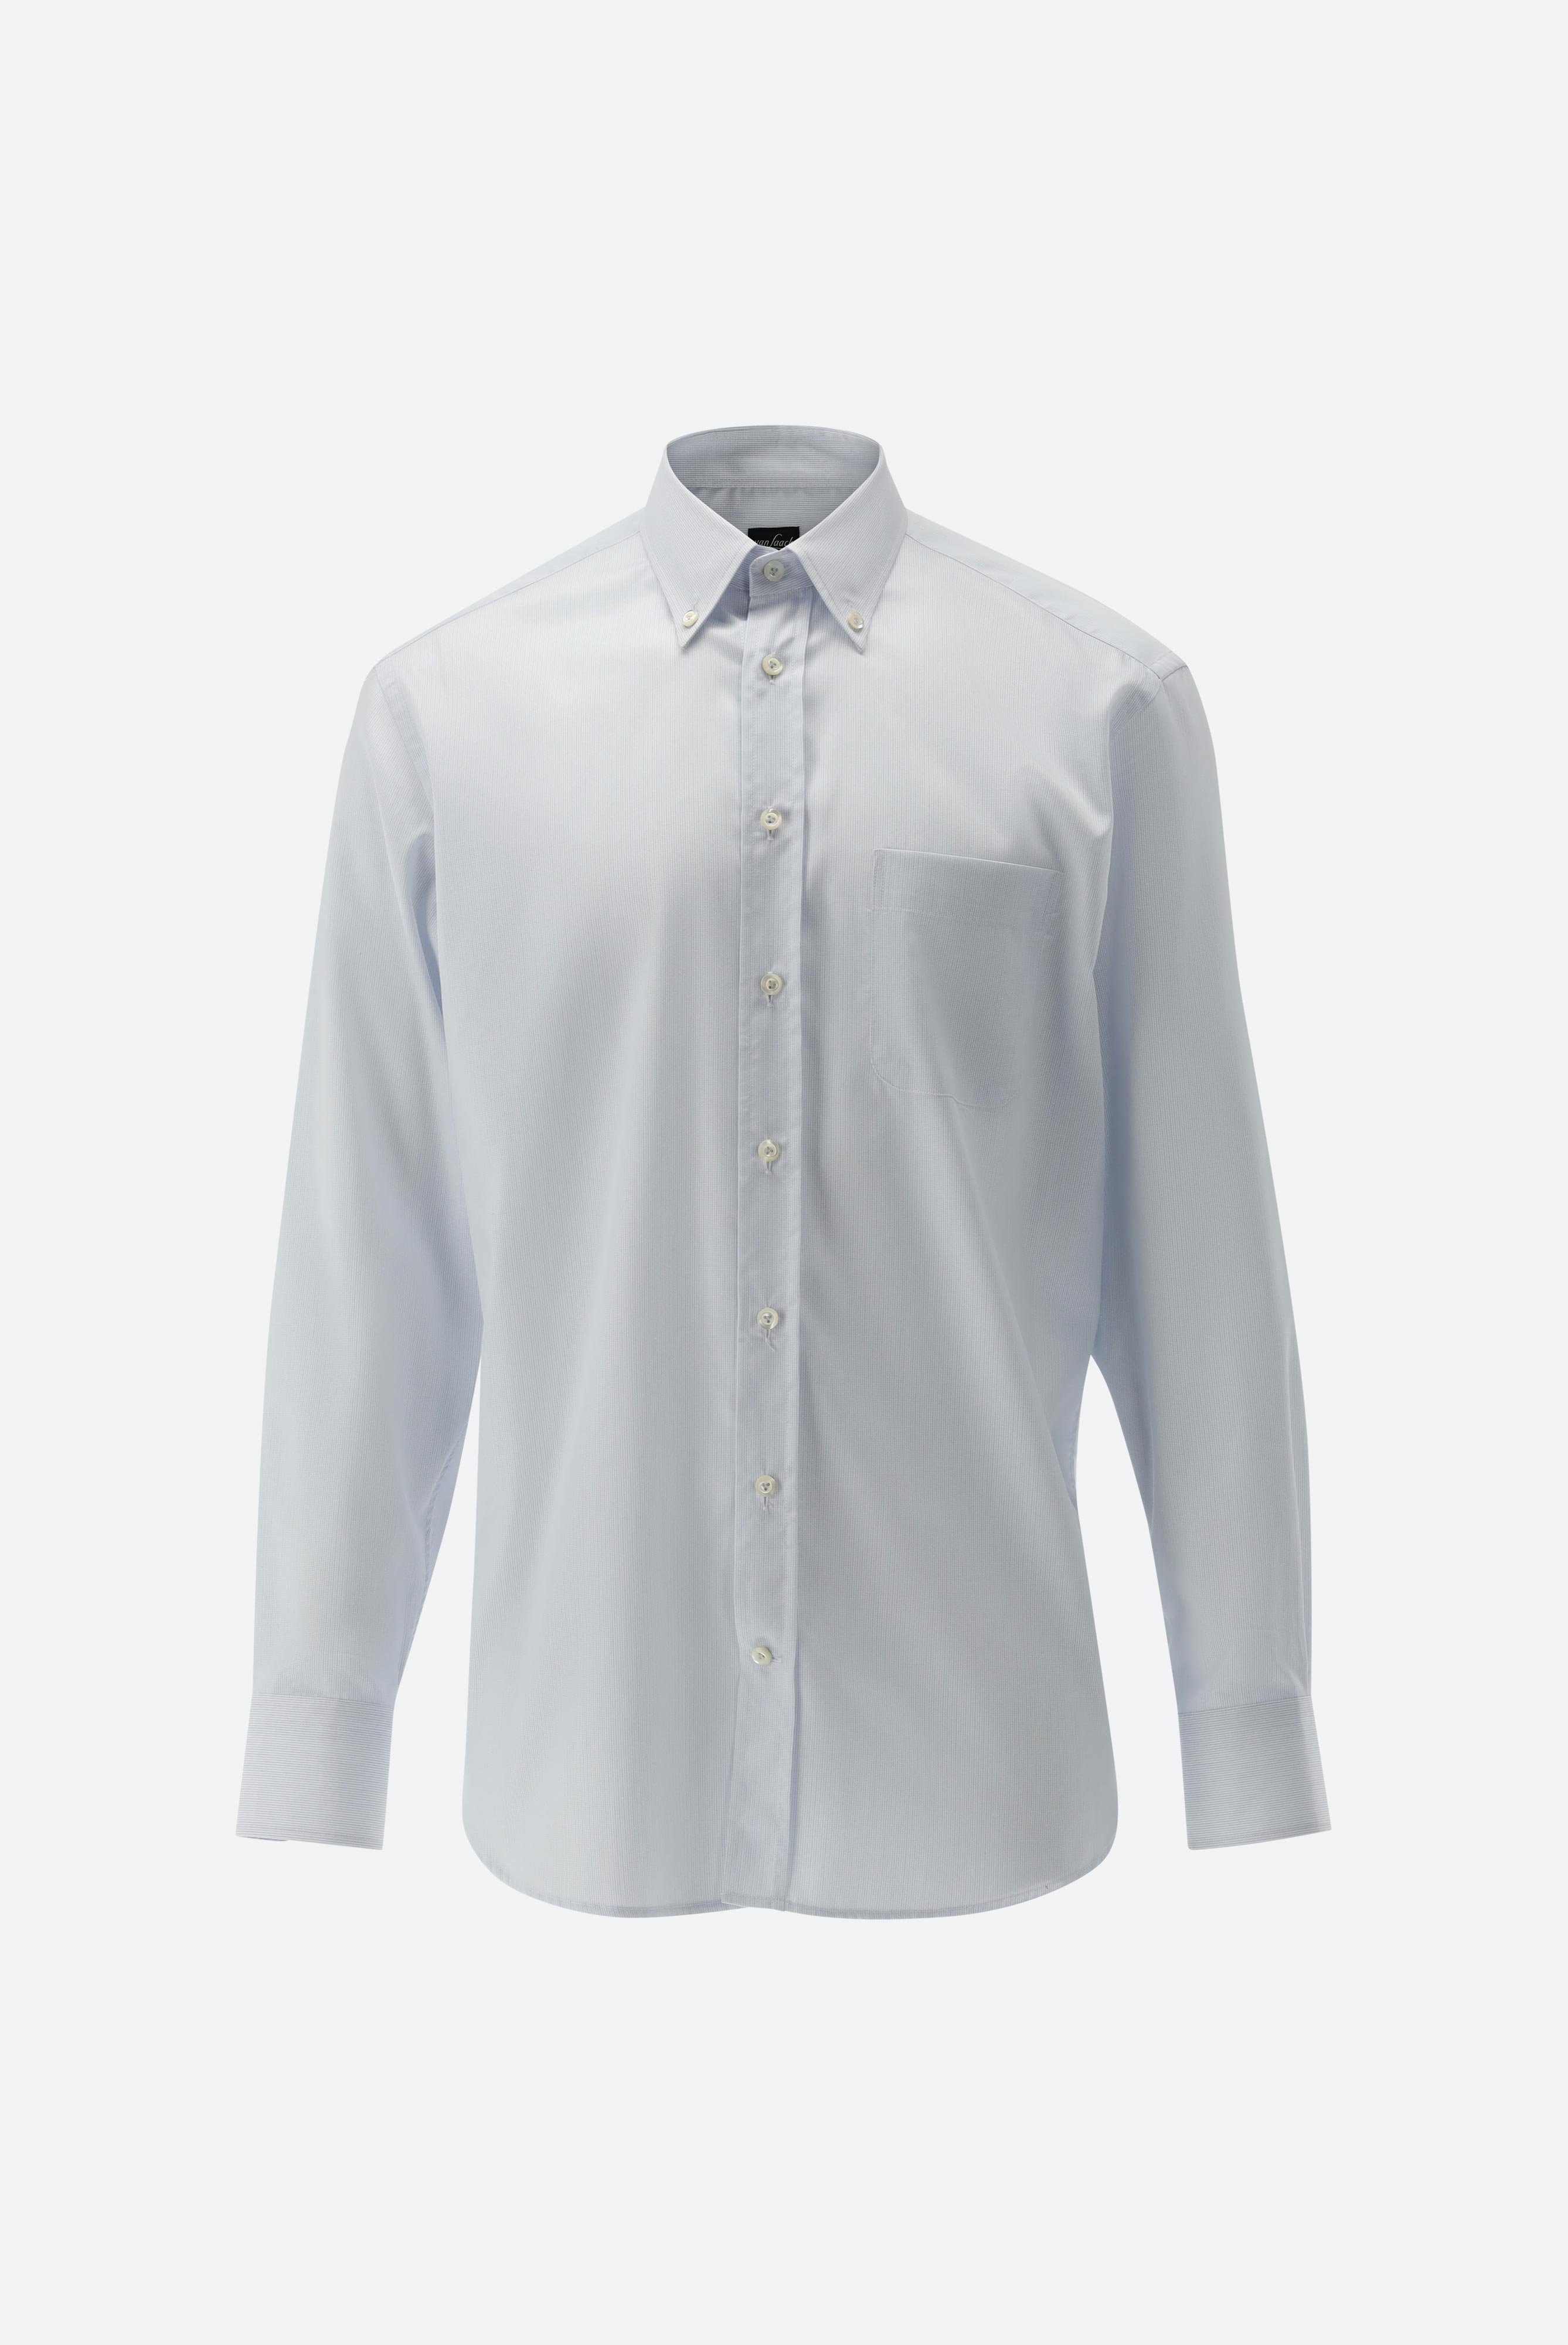 Easy Iron Shirts+Wrinkle Free Business Shirt Comfort Fit+20.2026.BQ.162611.720.39